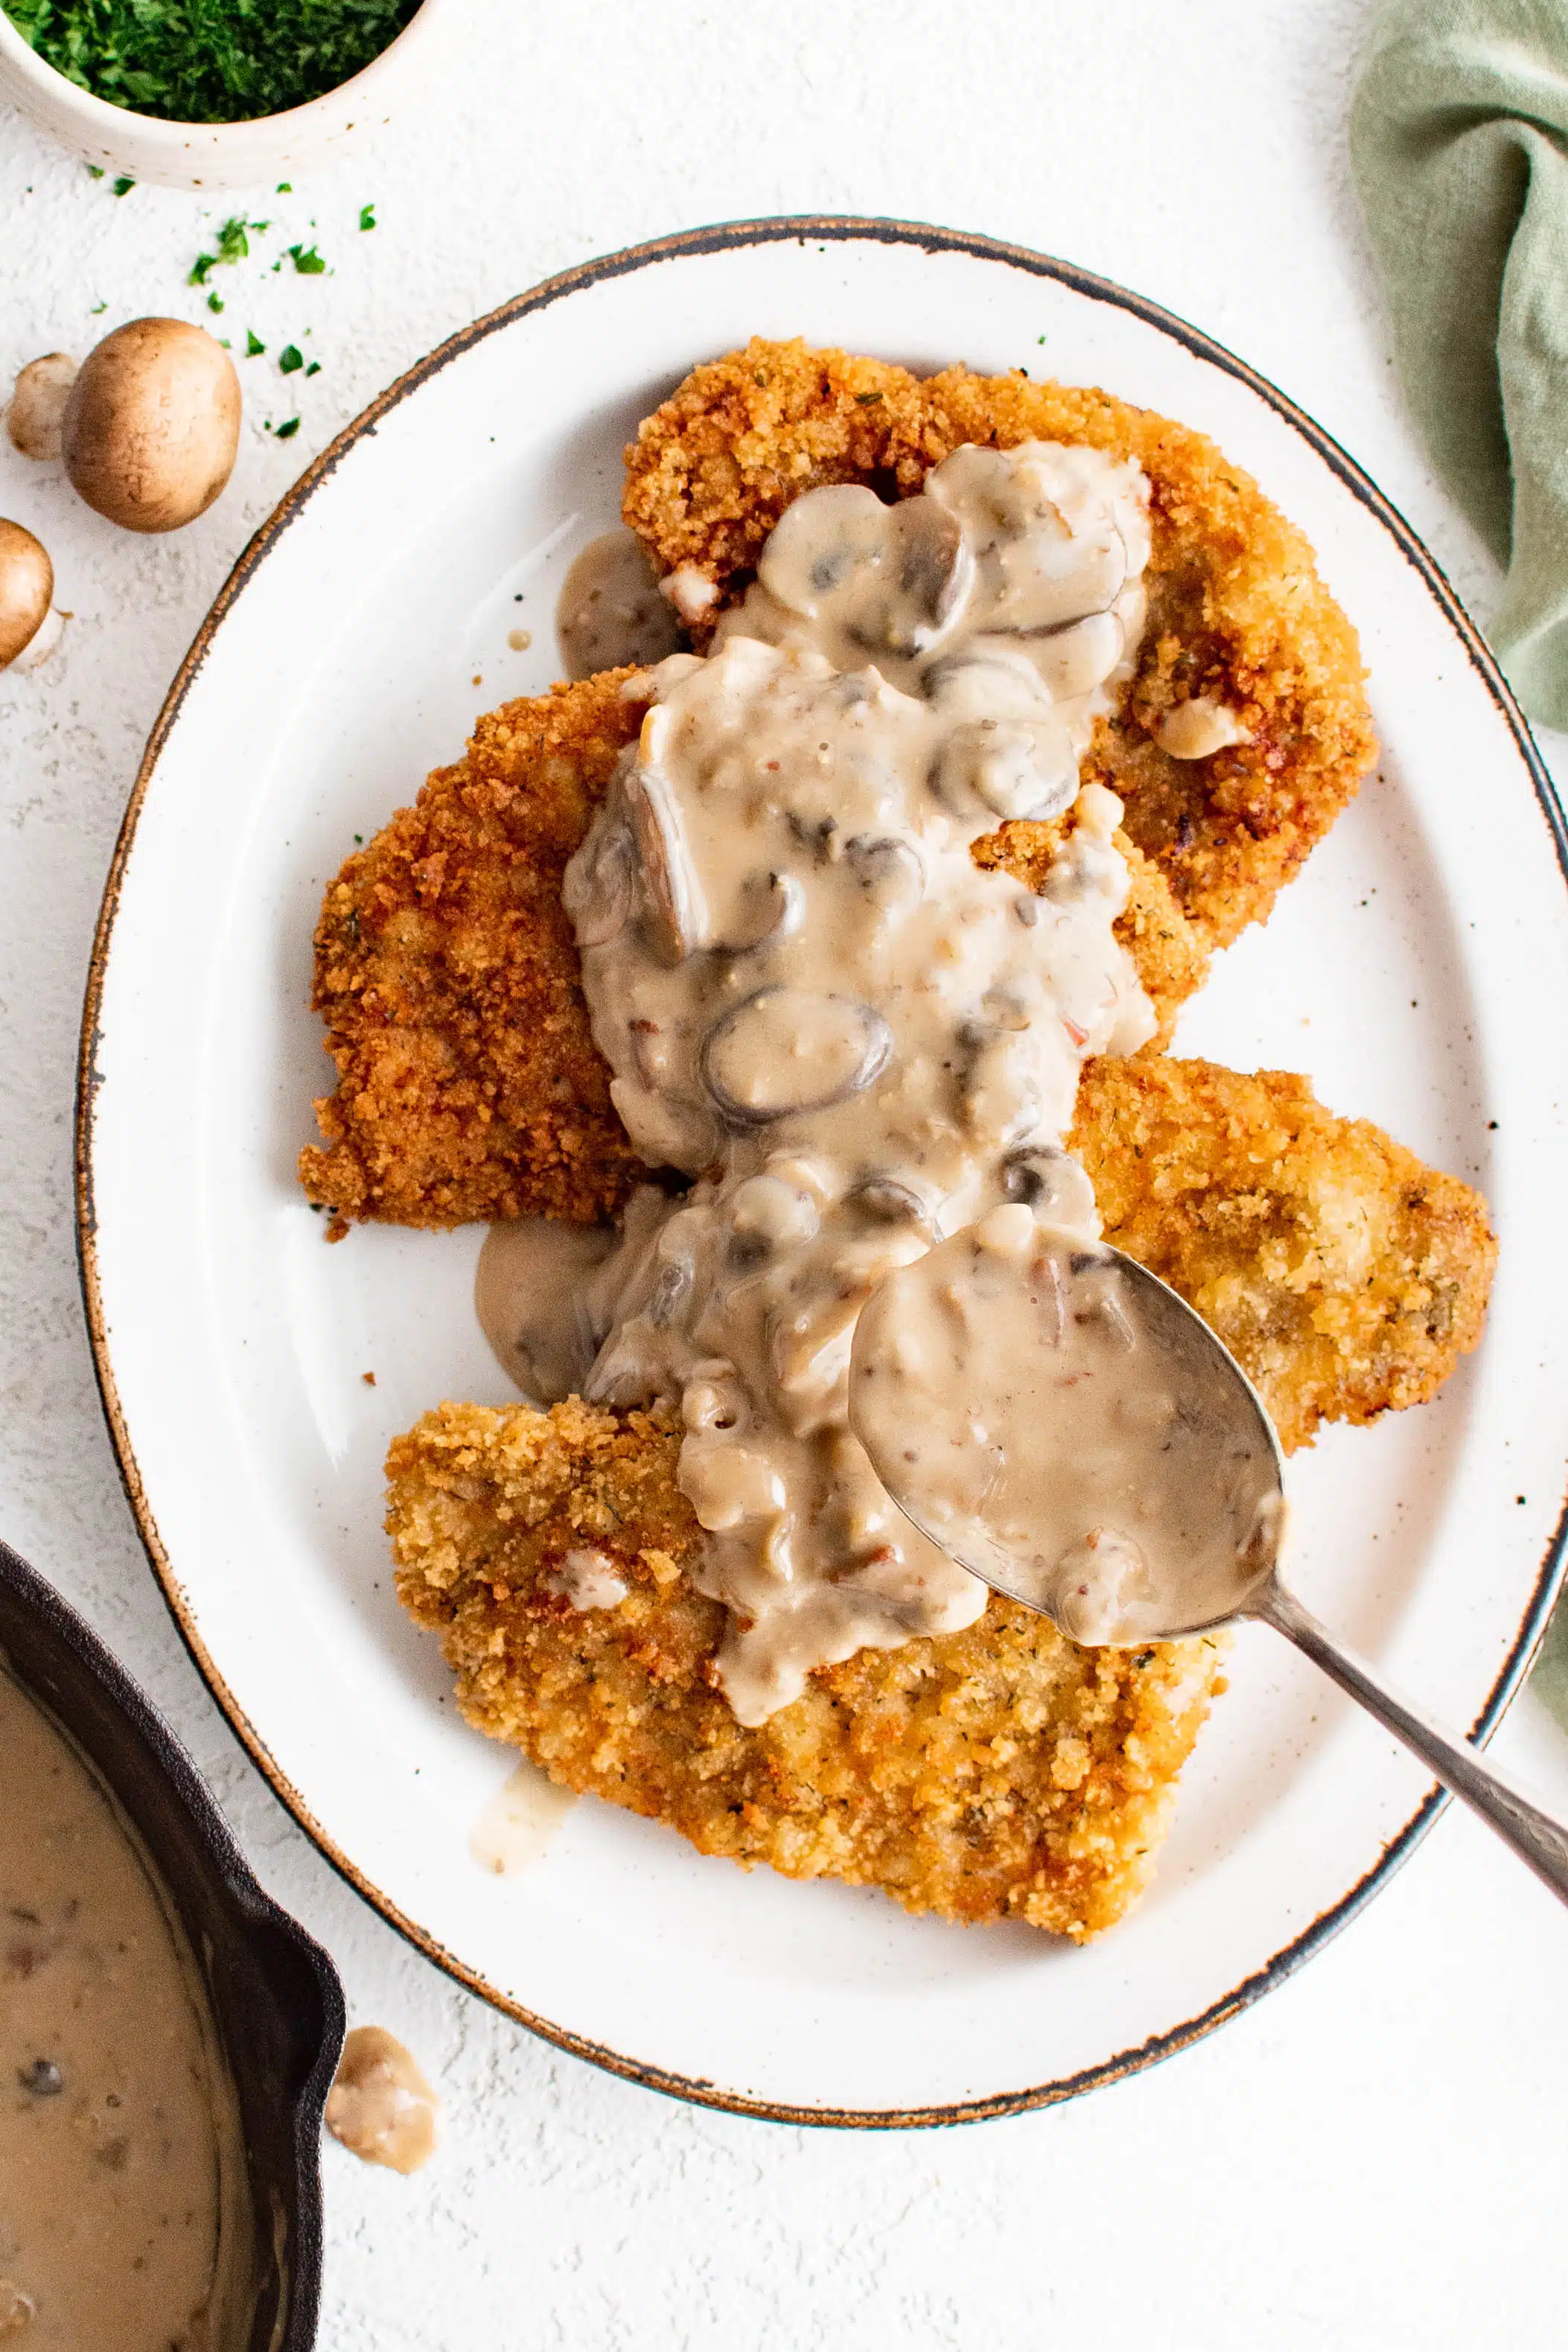 Large spoon carefully spooning mushroom sauce over four breaded and fried pork cutlets.